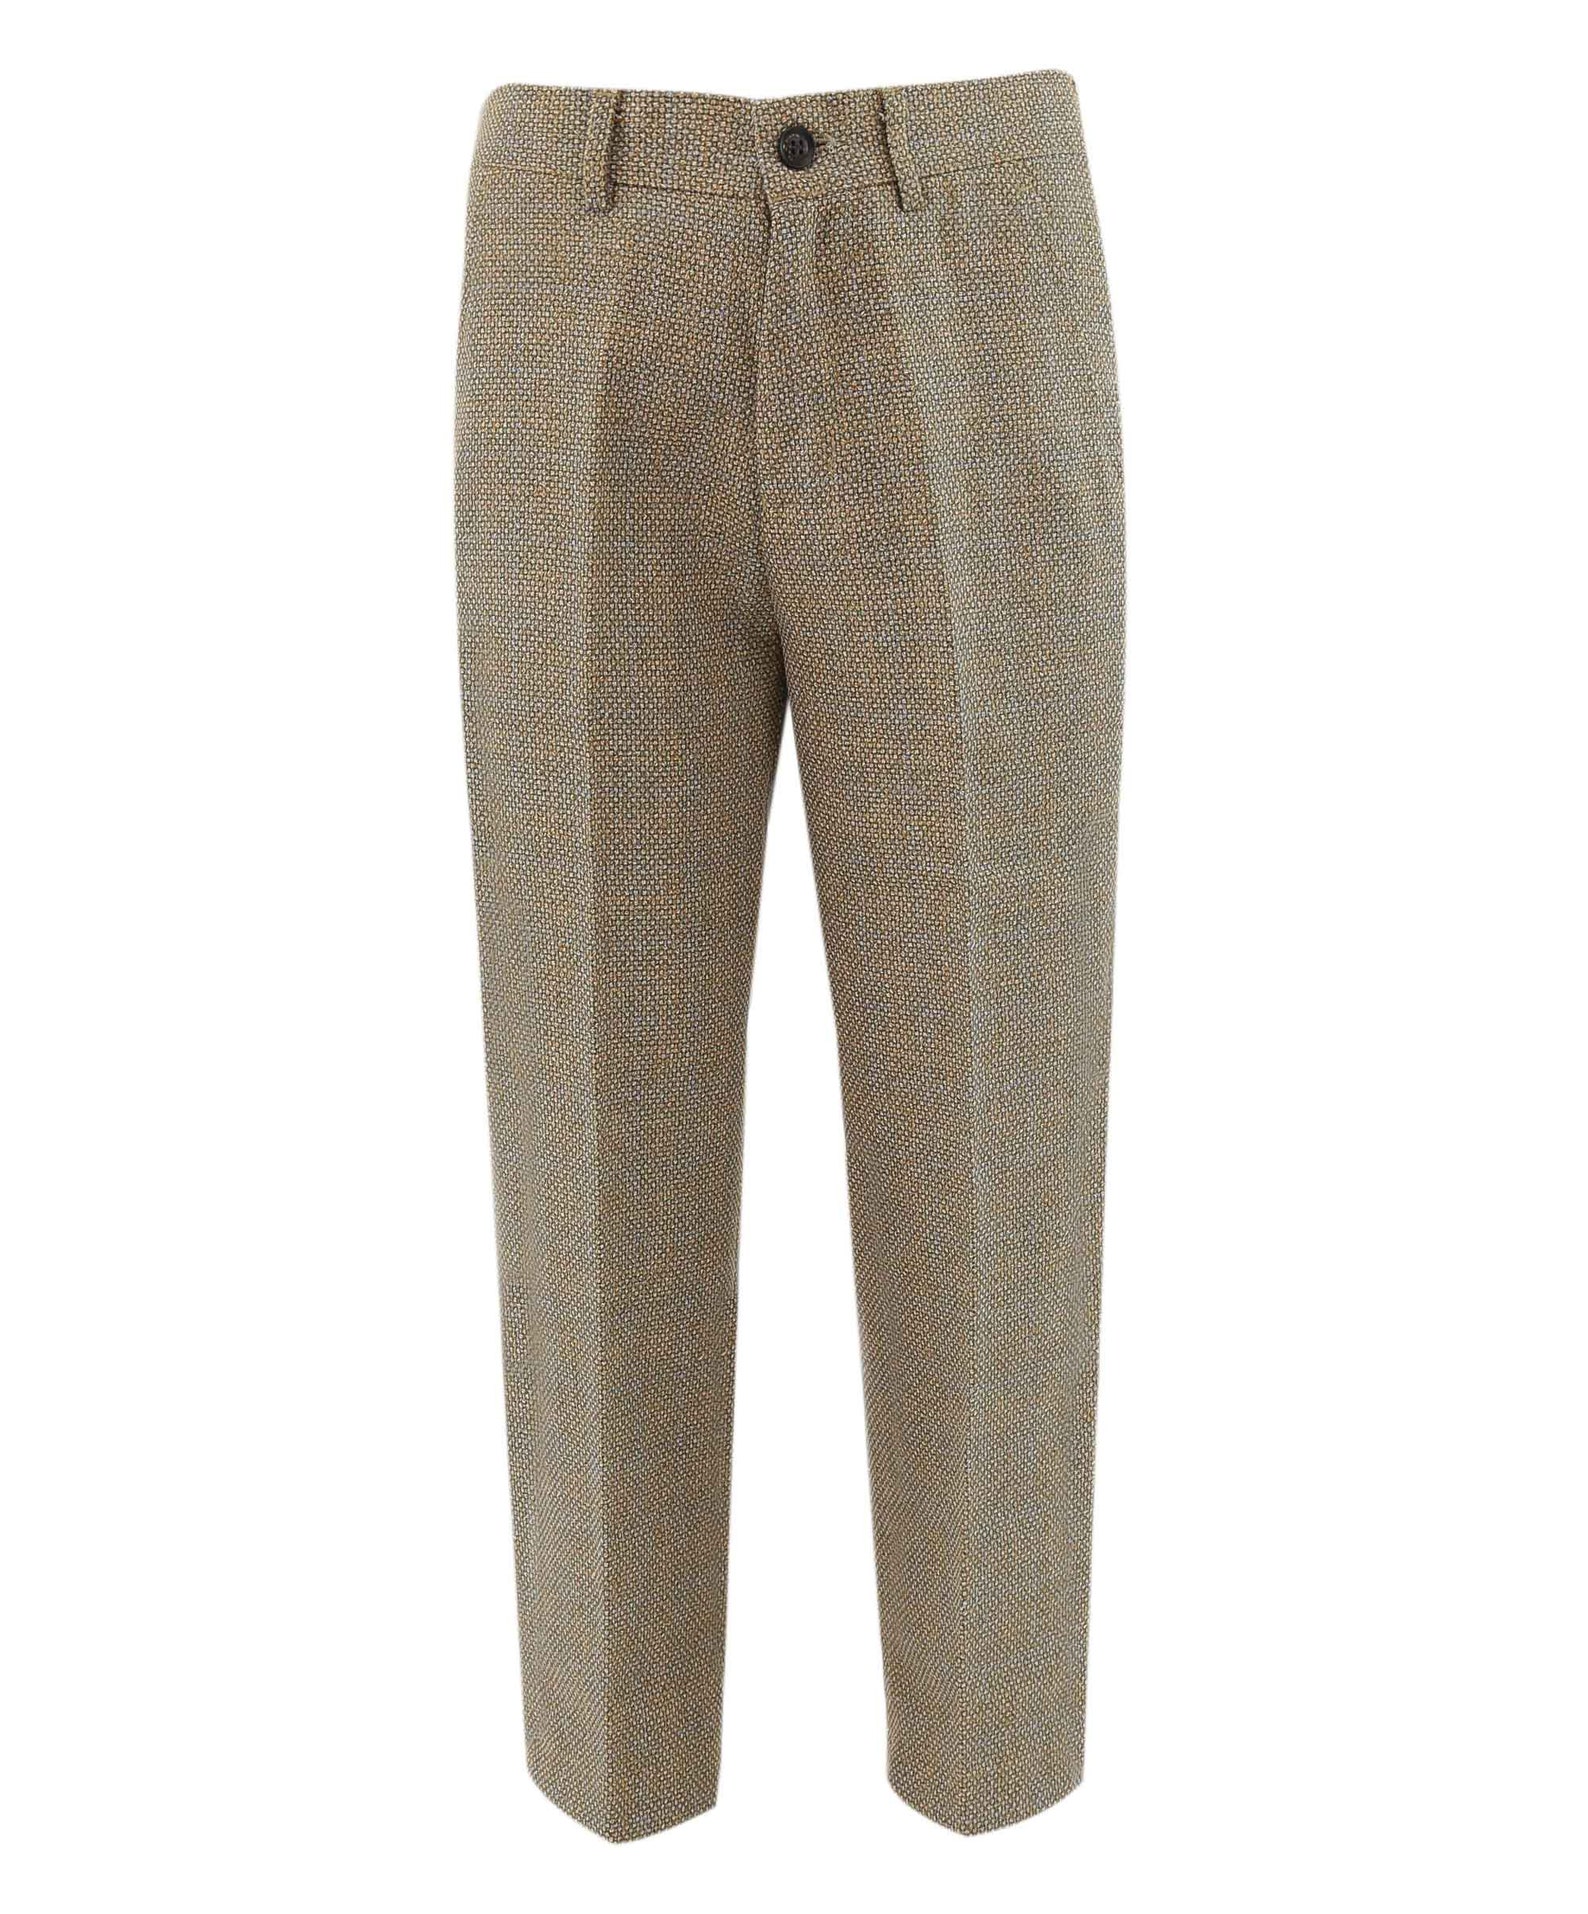 Boys Tweed Check Tailored Fit 3 Piece Formal Suit Set in Beige - Etsy UK